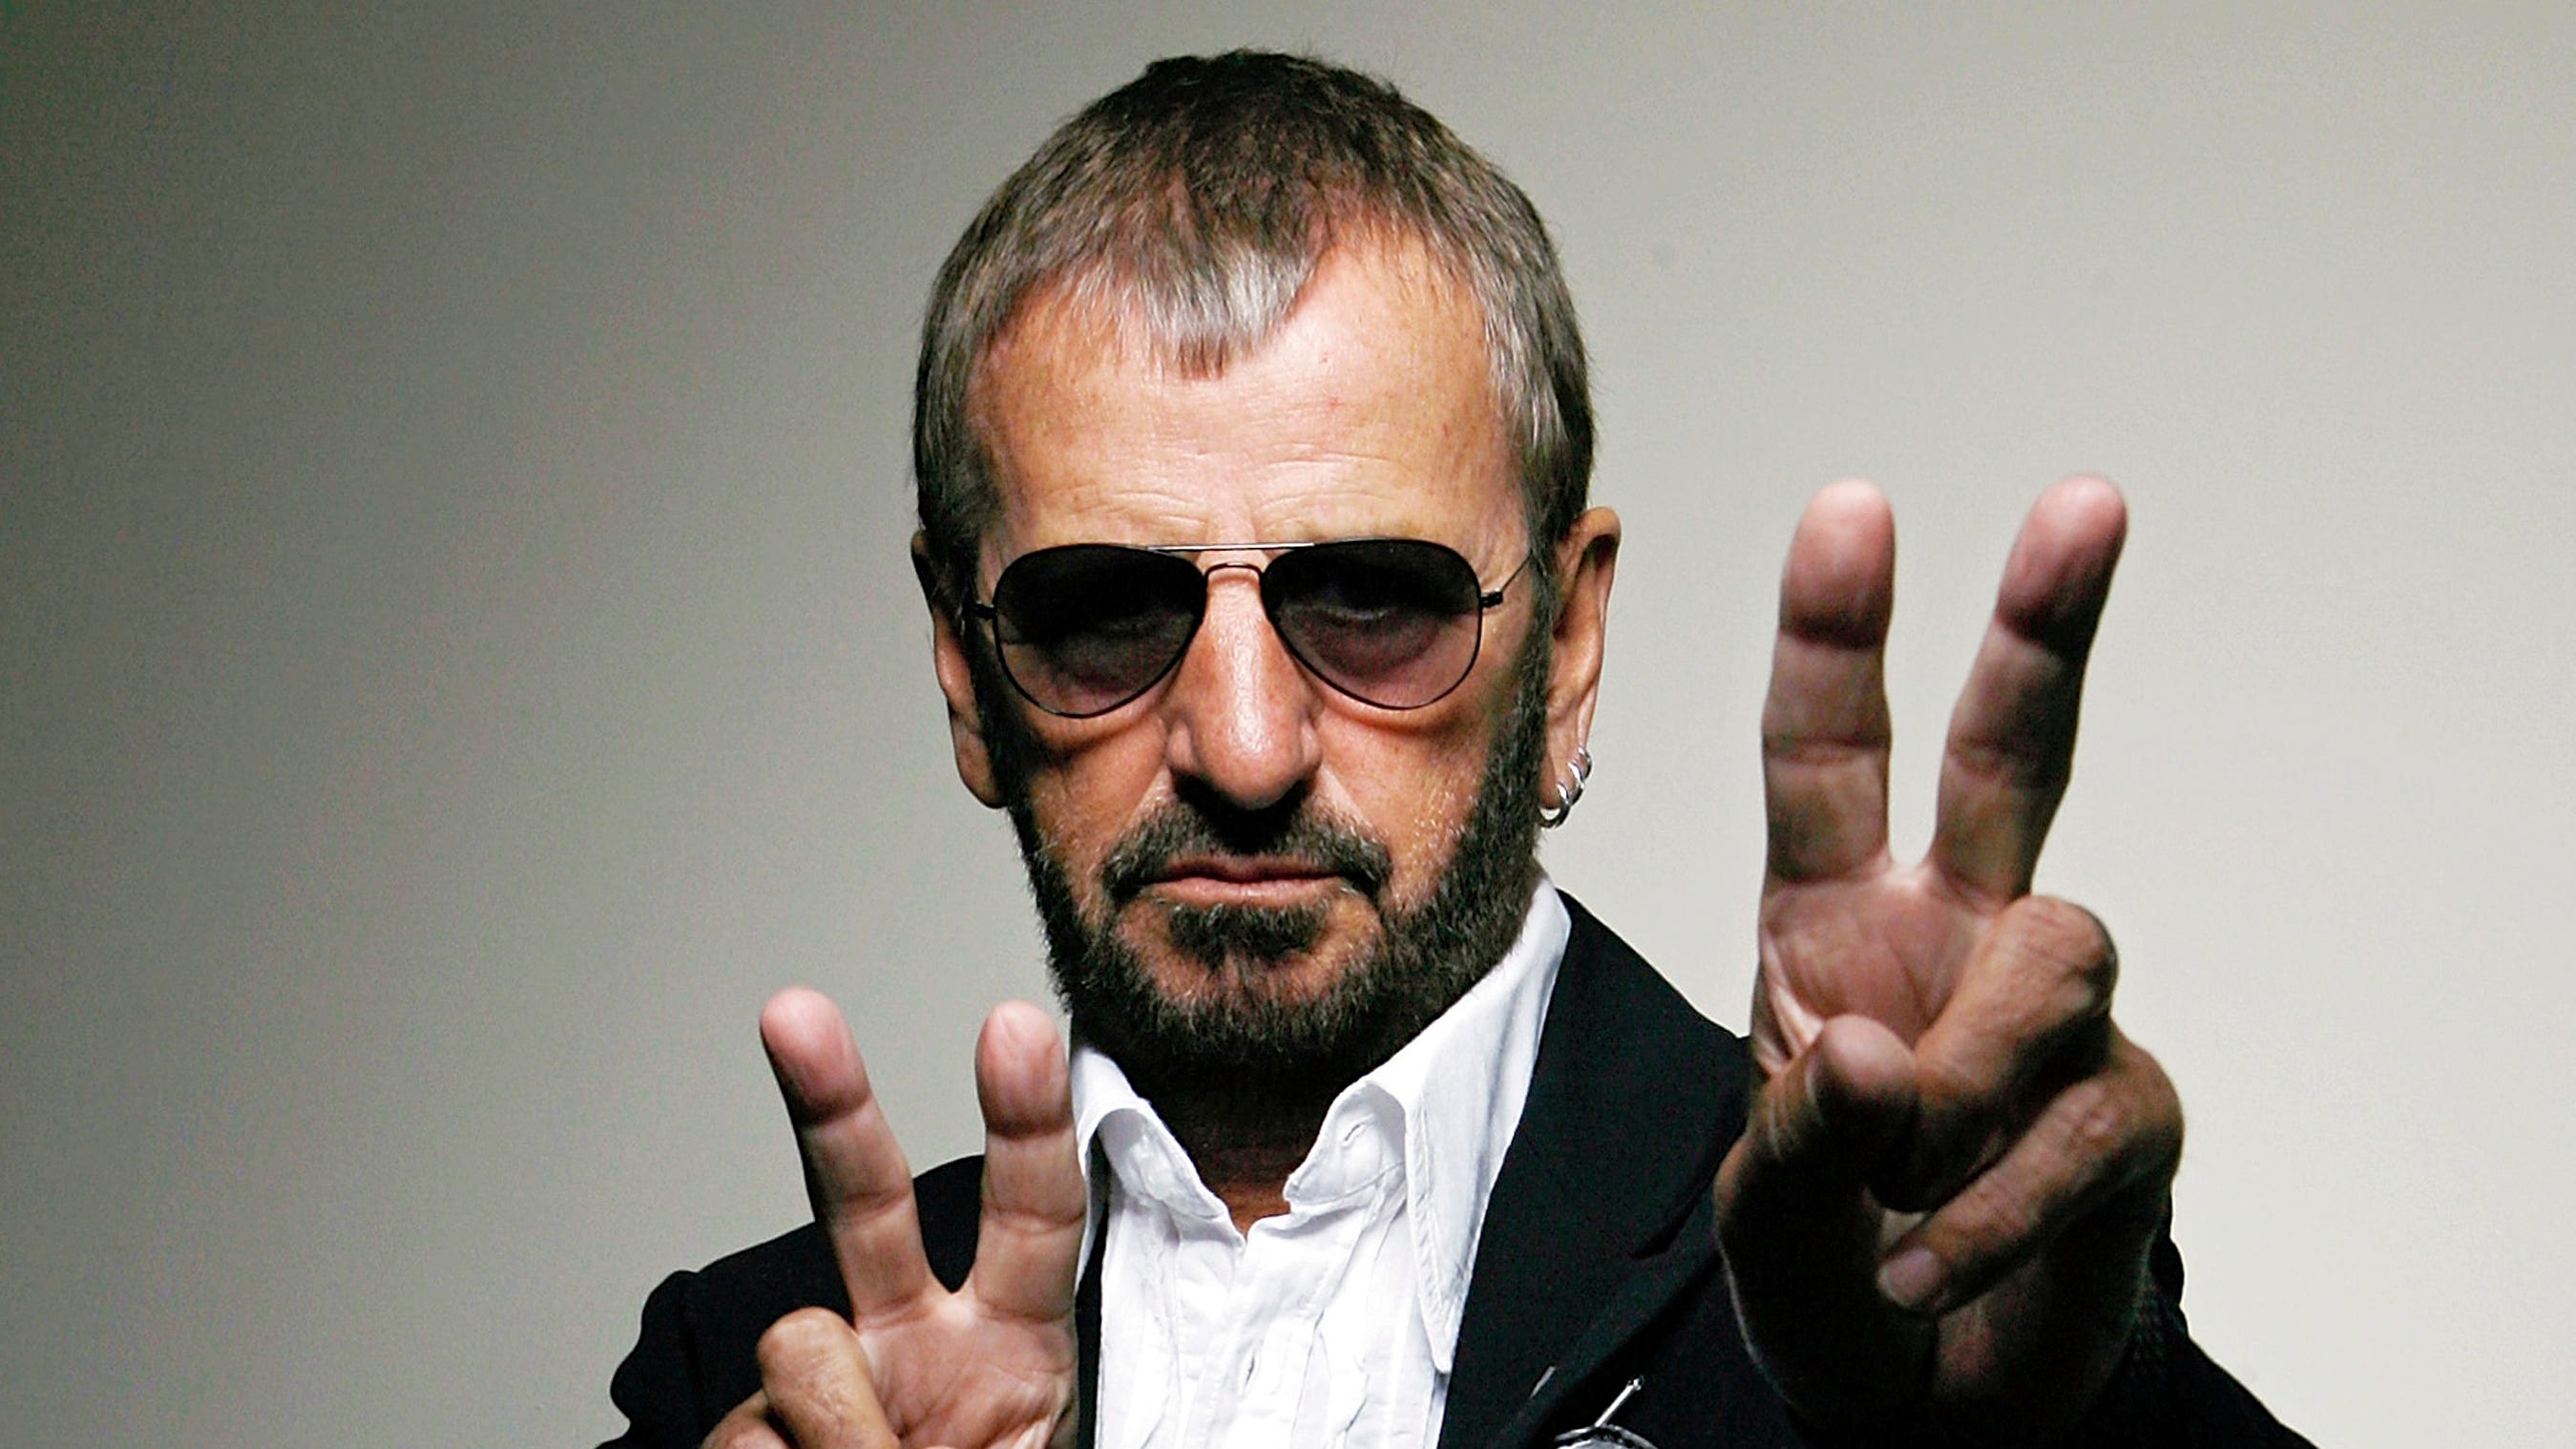 Ringo Starr Drops New Song Announced New Ep Recorded During Lockdown